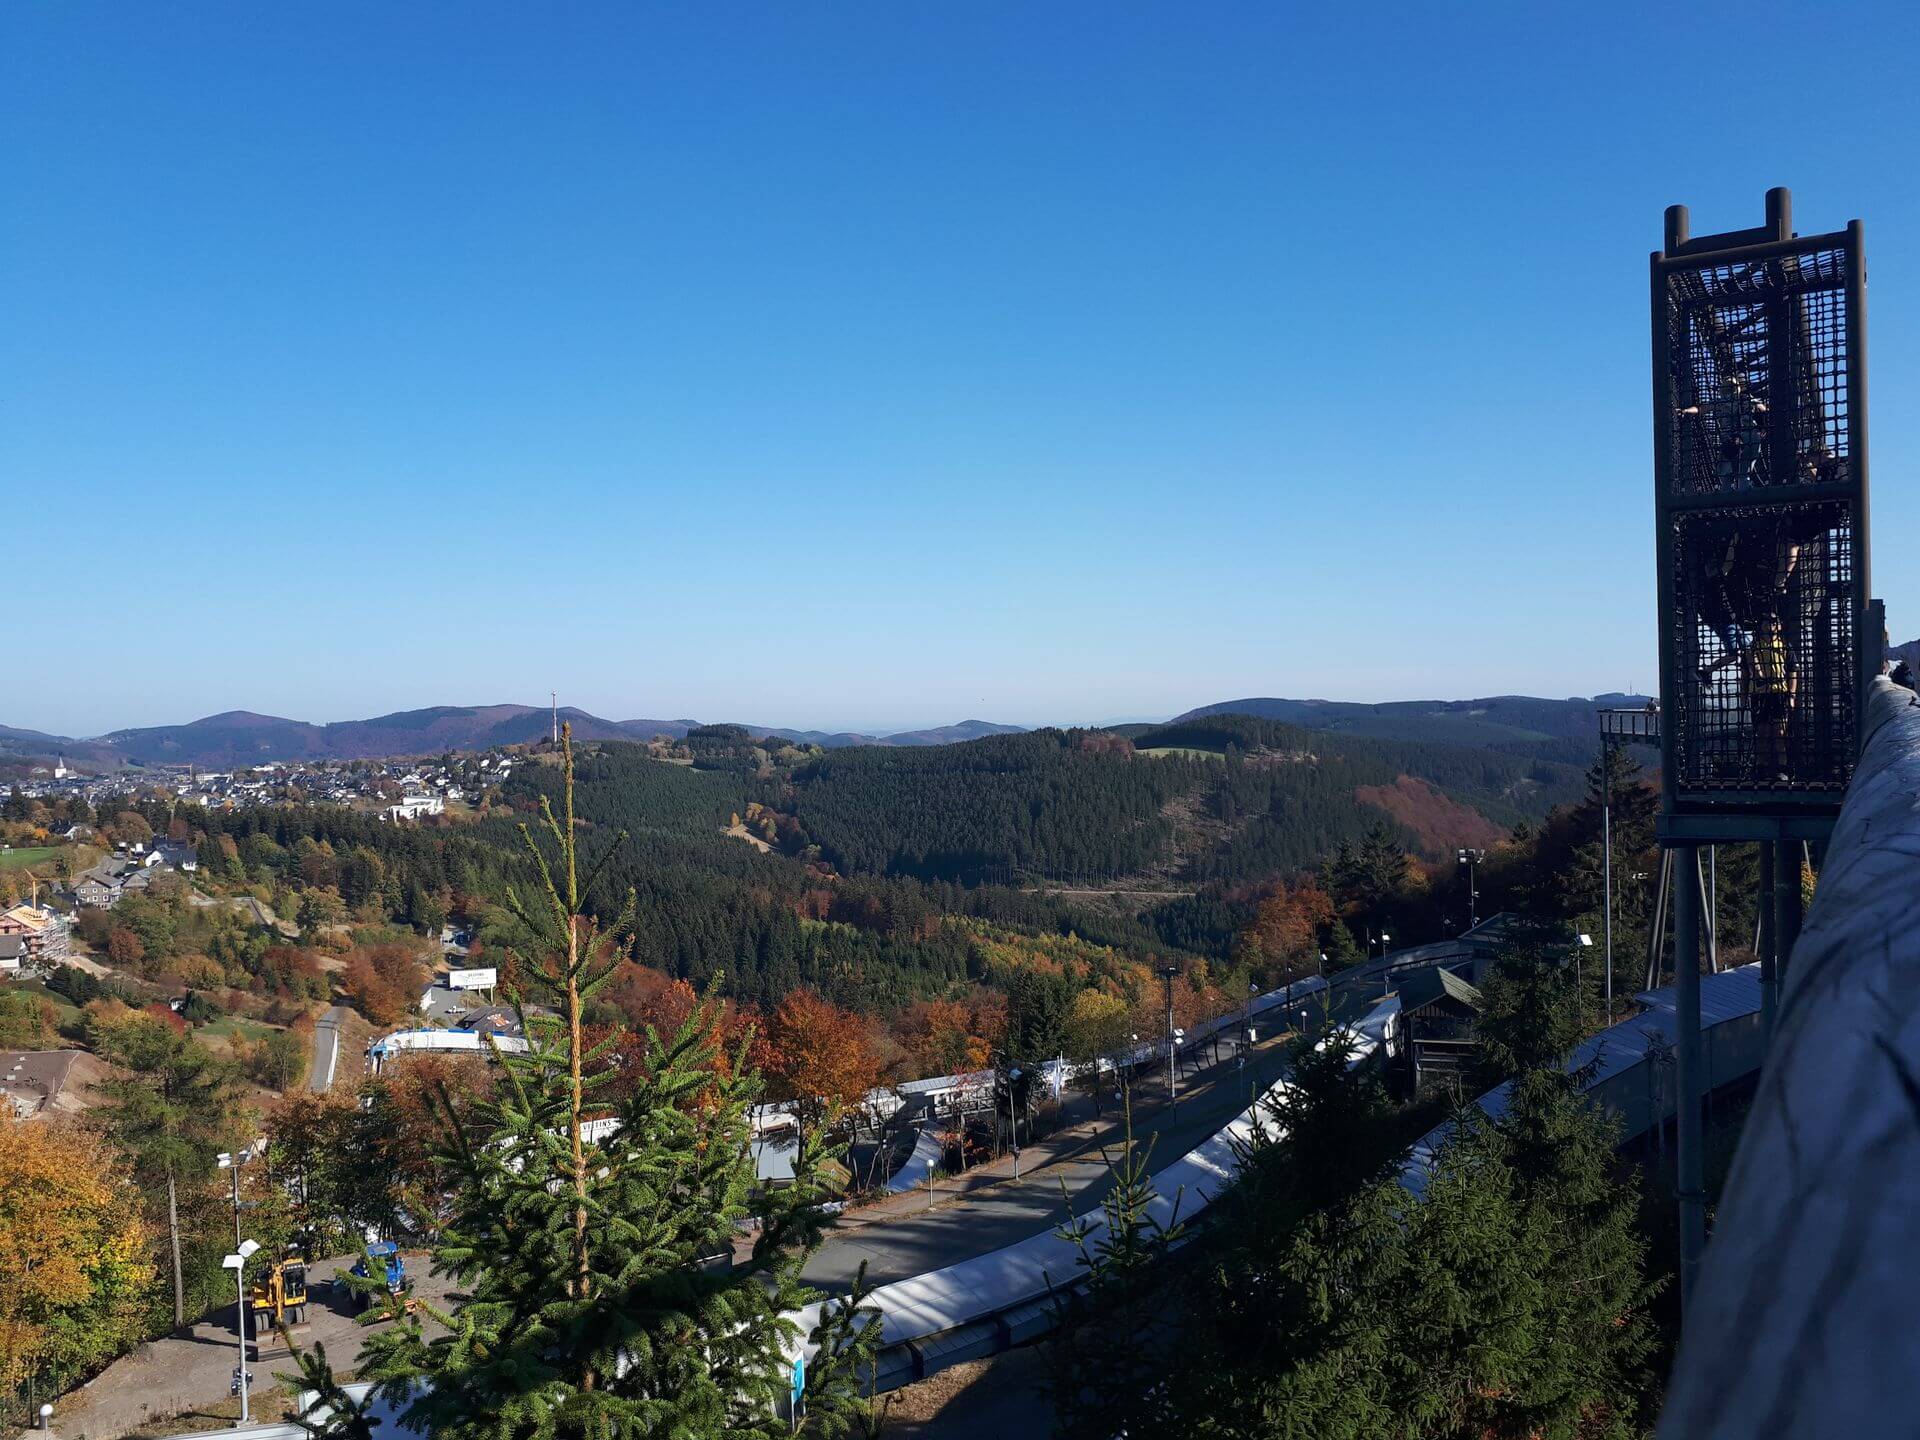 View nature from the Panorama Erlebnis Brücke in Winterberg